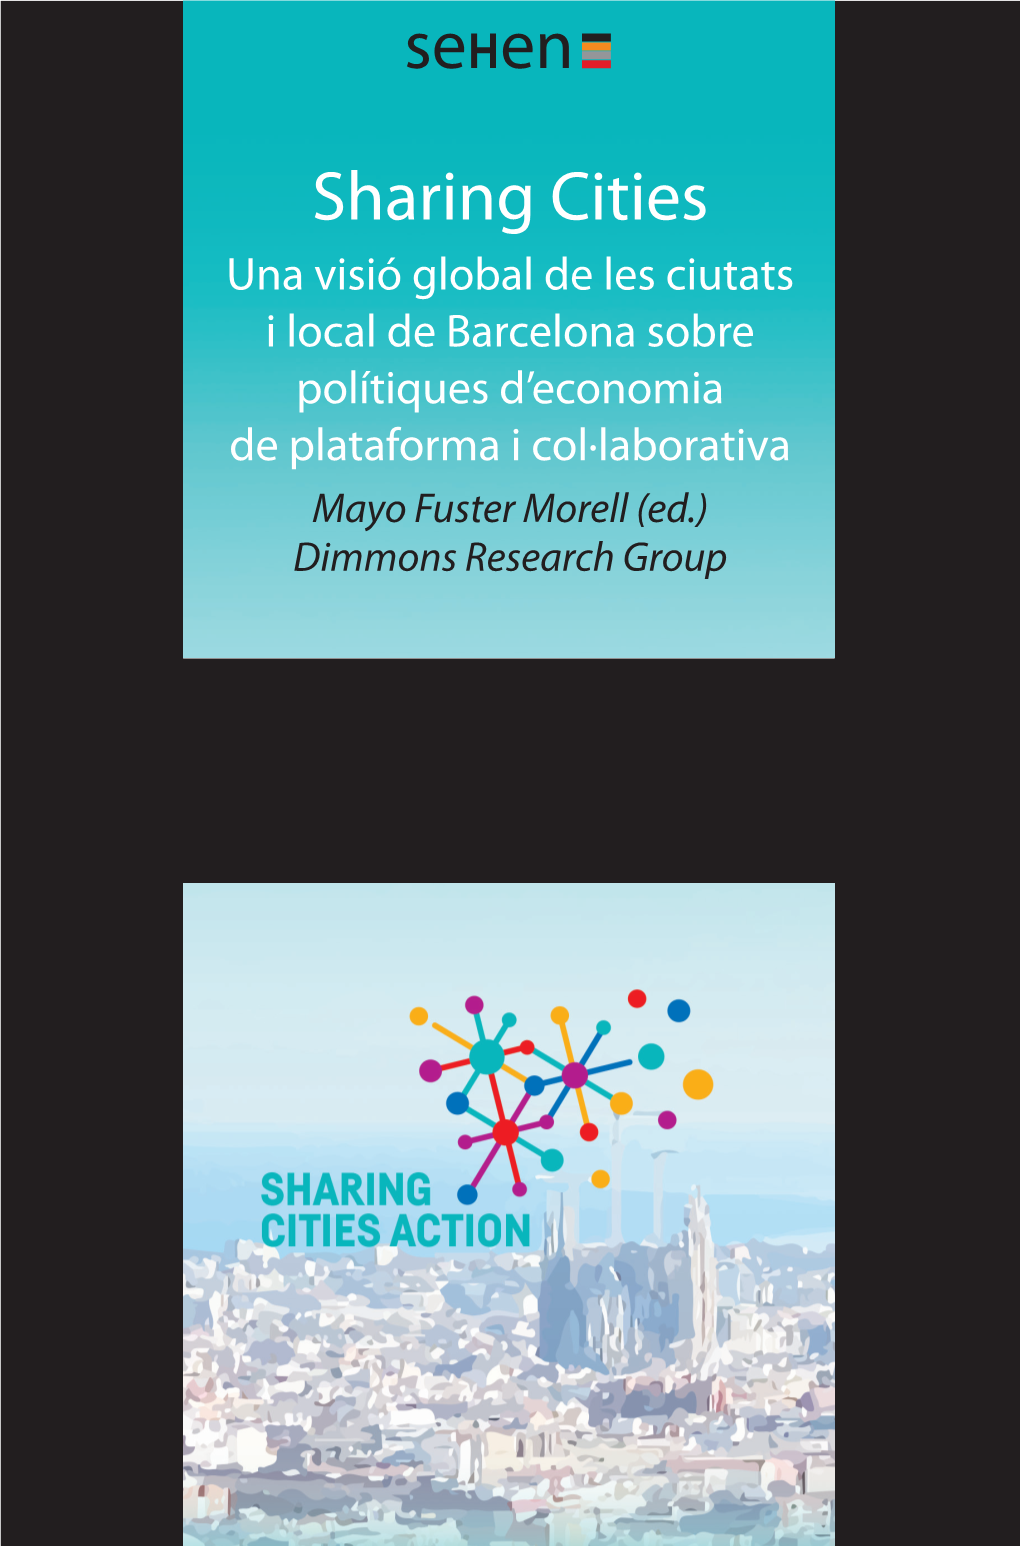 Sharing Cities Action